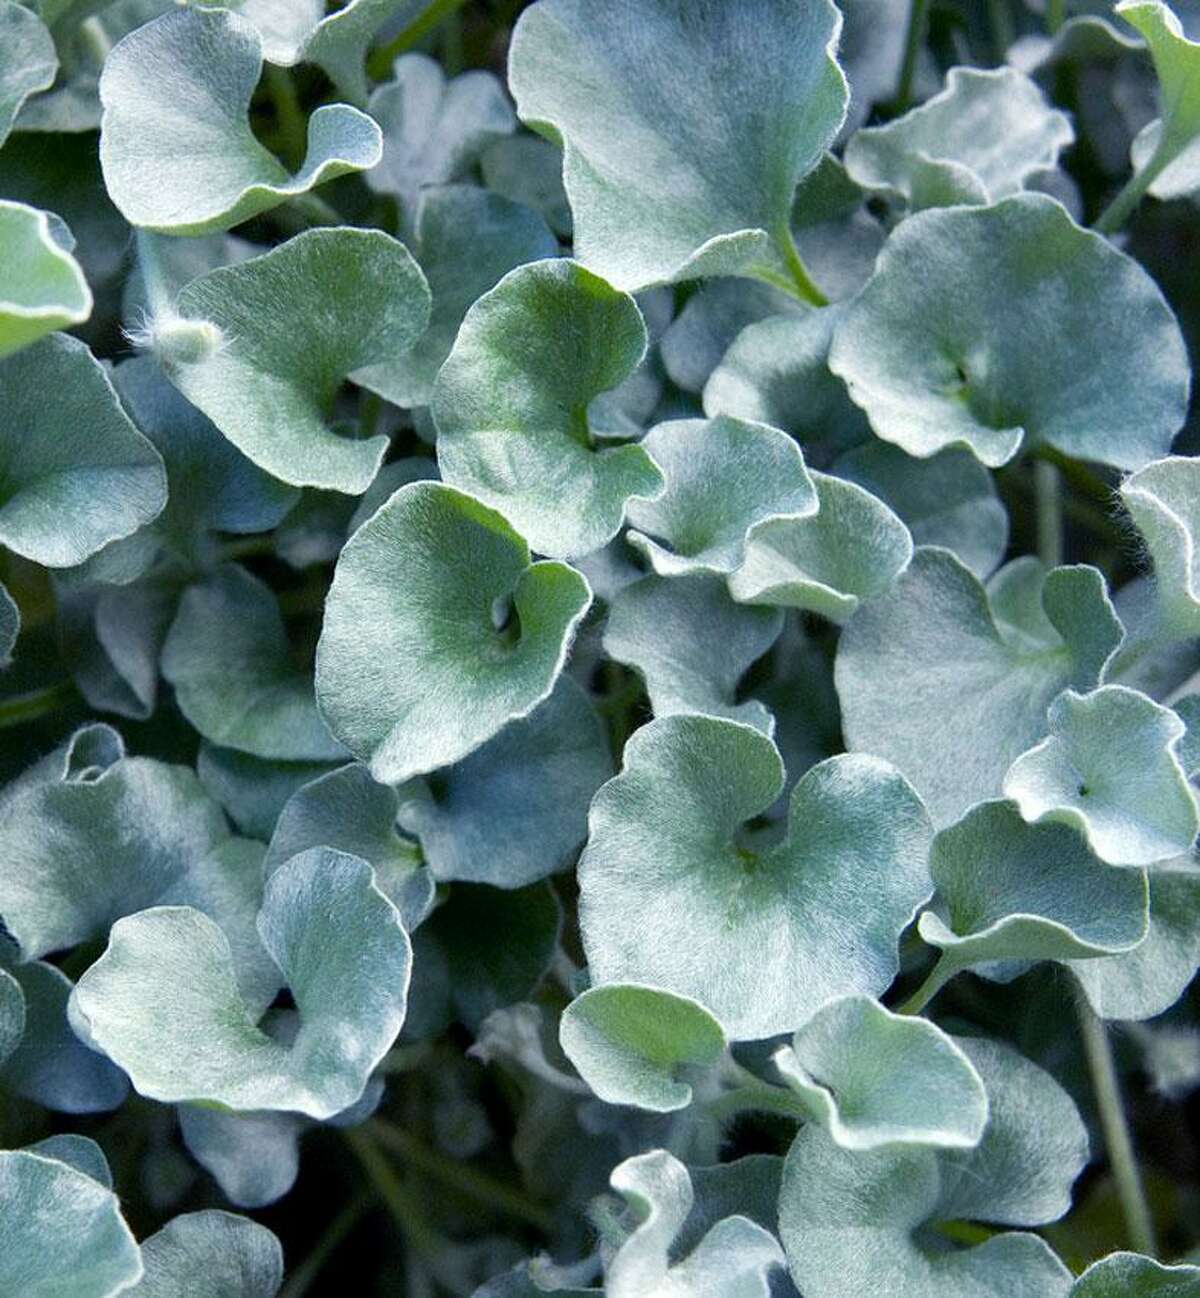 Dichondra Silver Falls is a sun lover that creates a waterfall of silver once established.